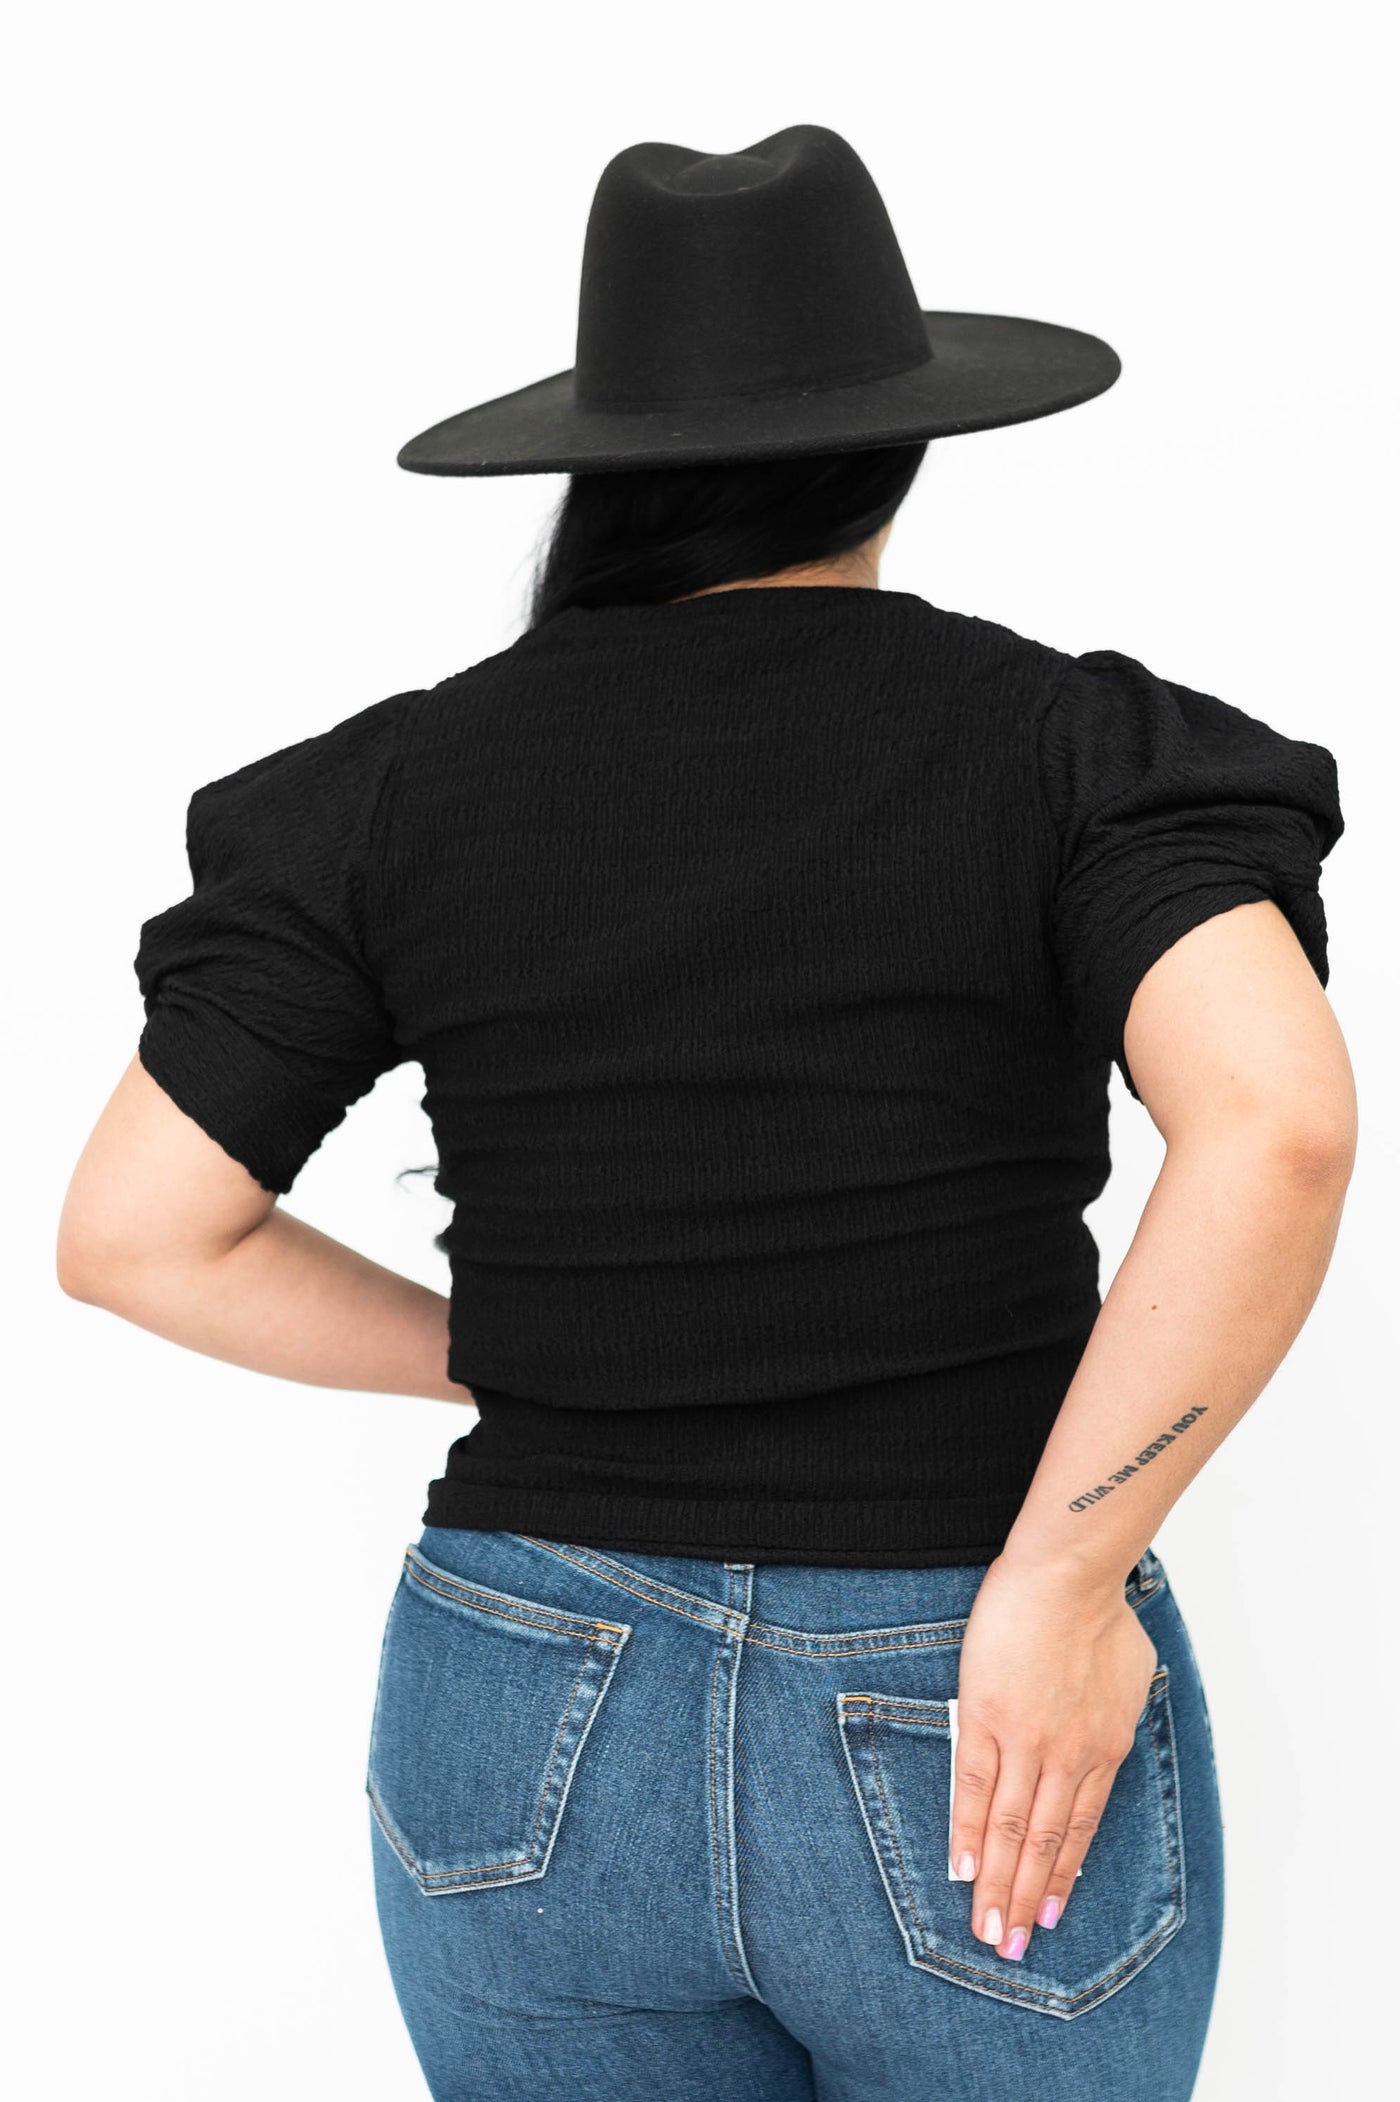 Back view of a large black top